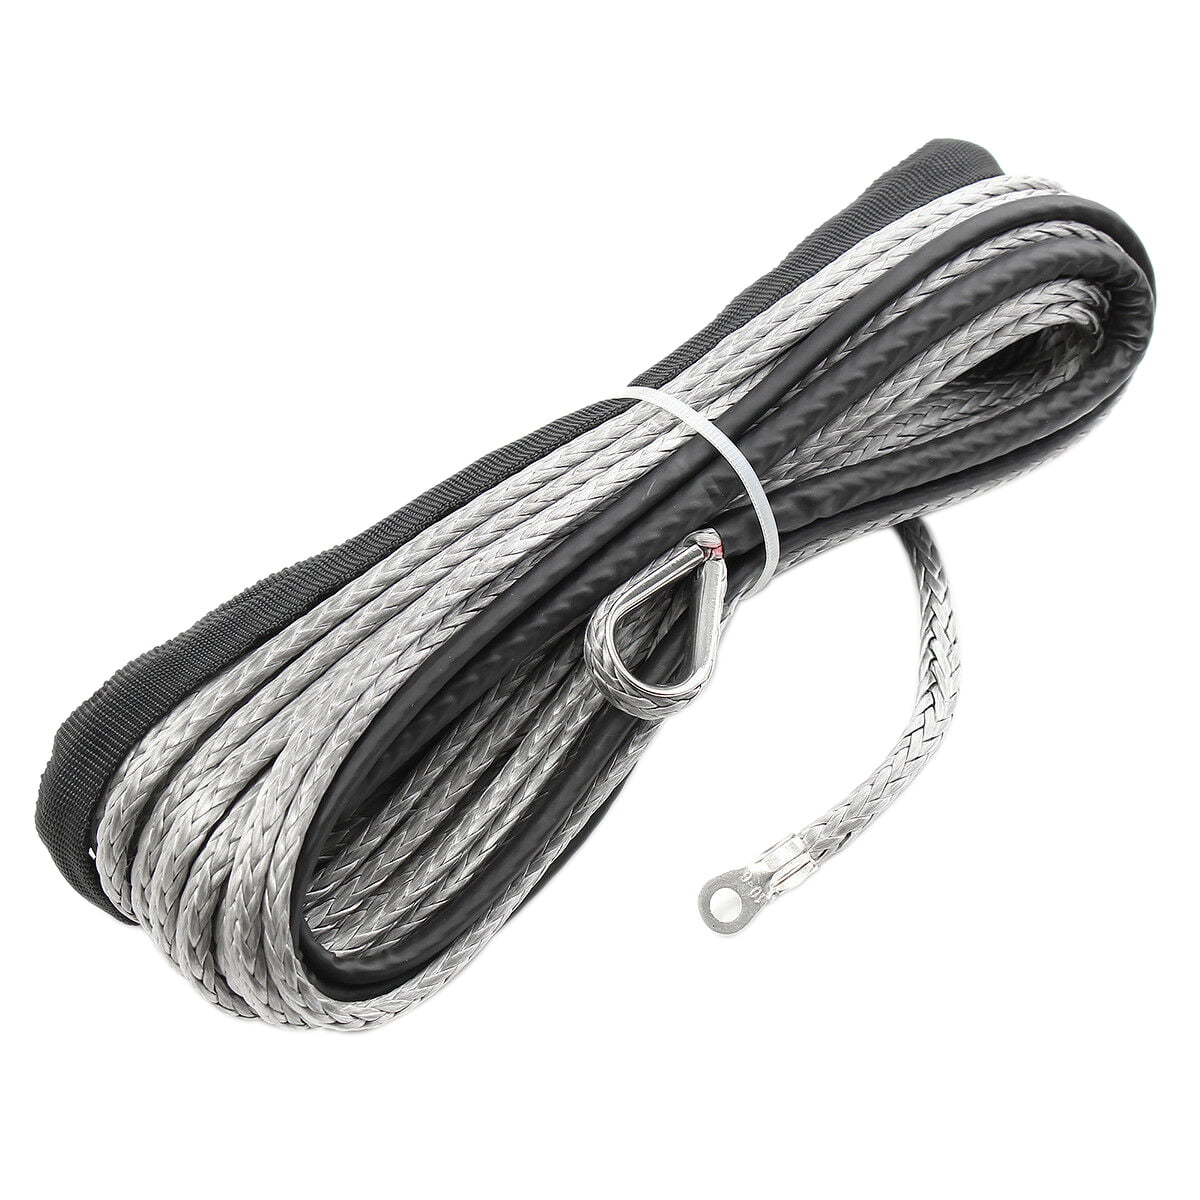 3/16" x 50inch 7700LBS Synthetic Winch Line Cable Rope with Sheath ATV UTV Truck 